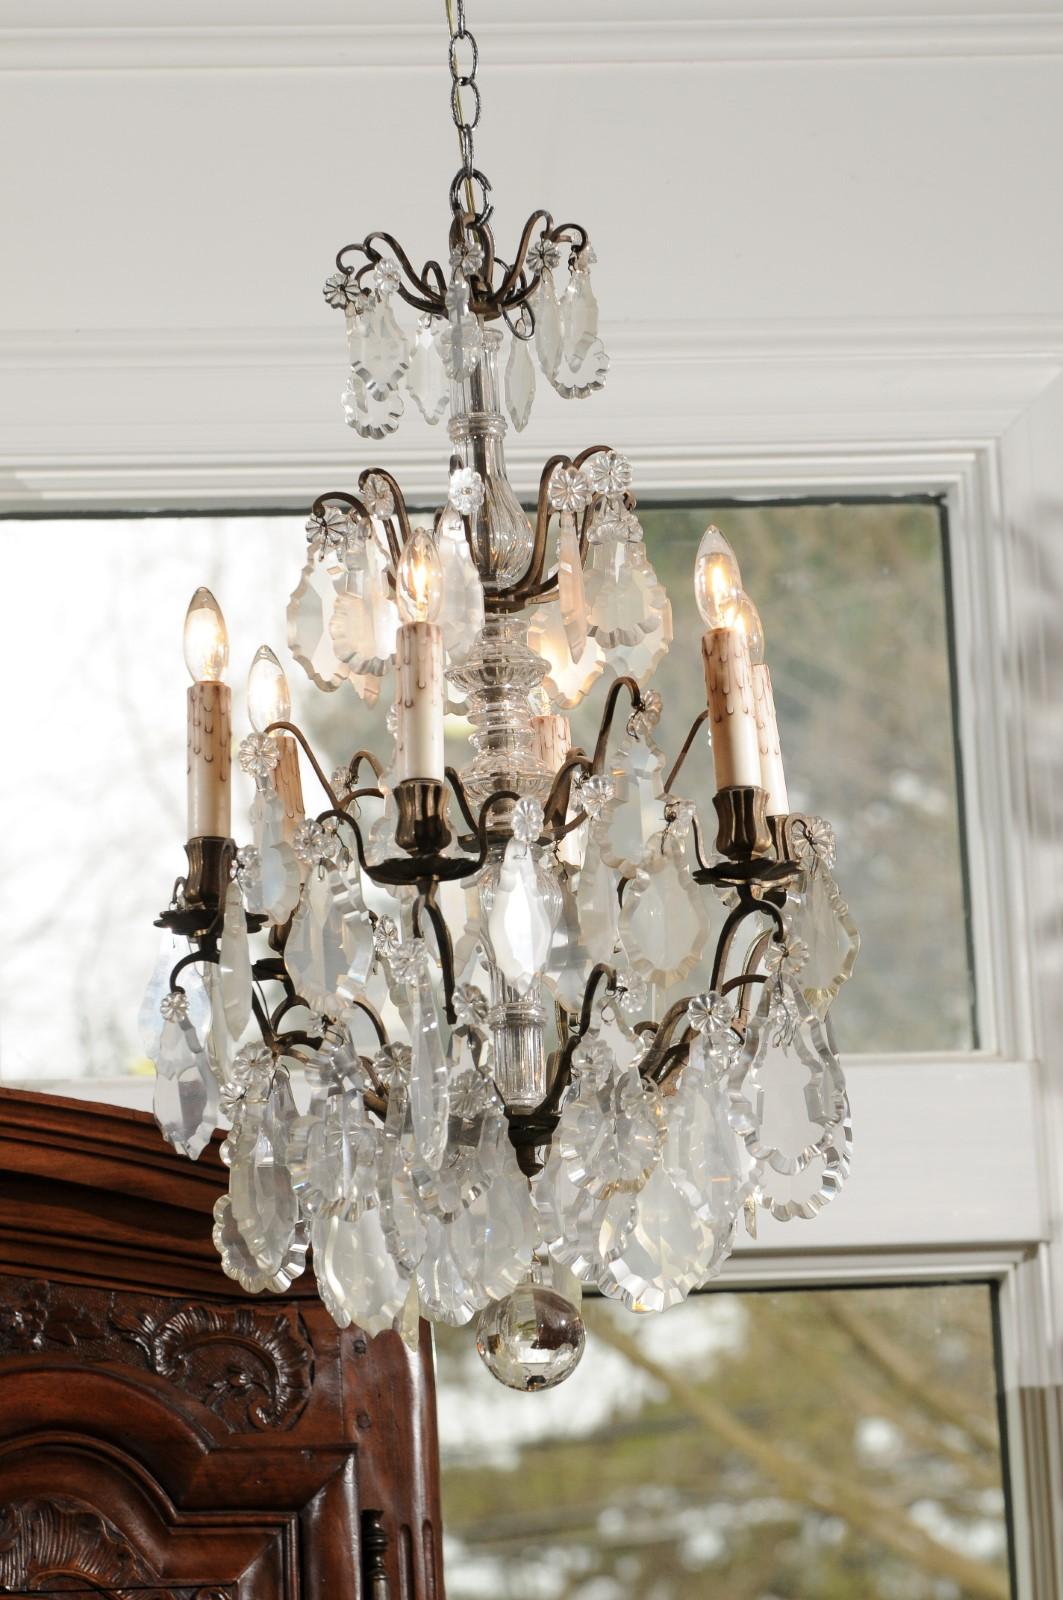 A French six-light crystal chandelier from the 19th century, with pendeloques and patinated metal armature. Created in France during the 19th century, this crystal chandelier features a central column distributing, through petite scrolls, an